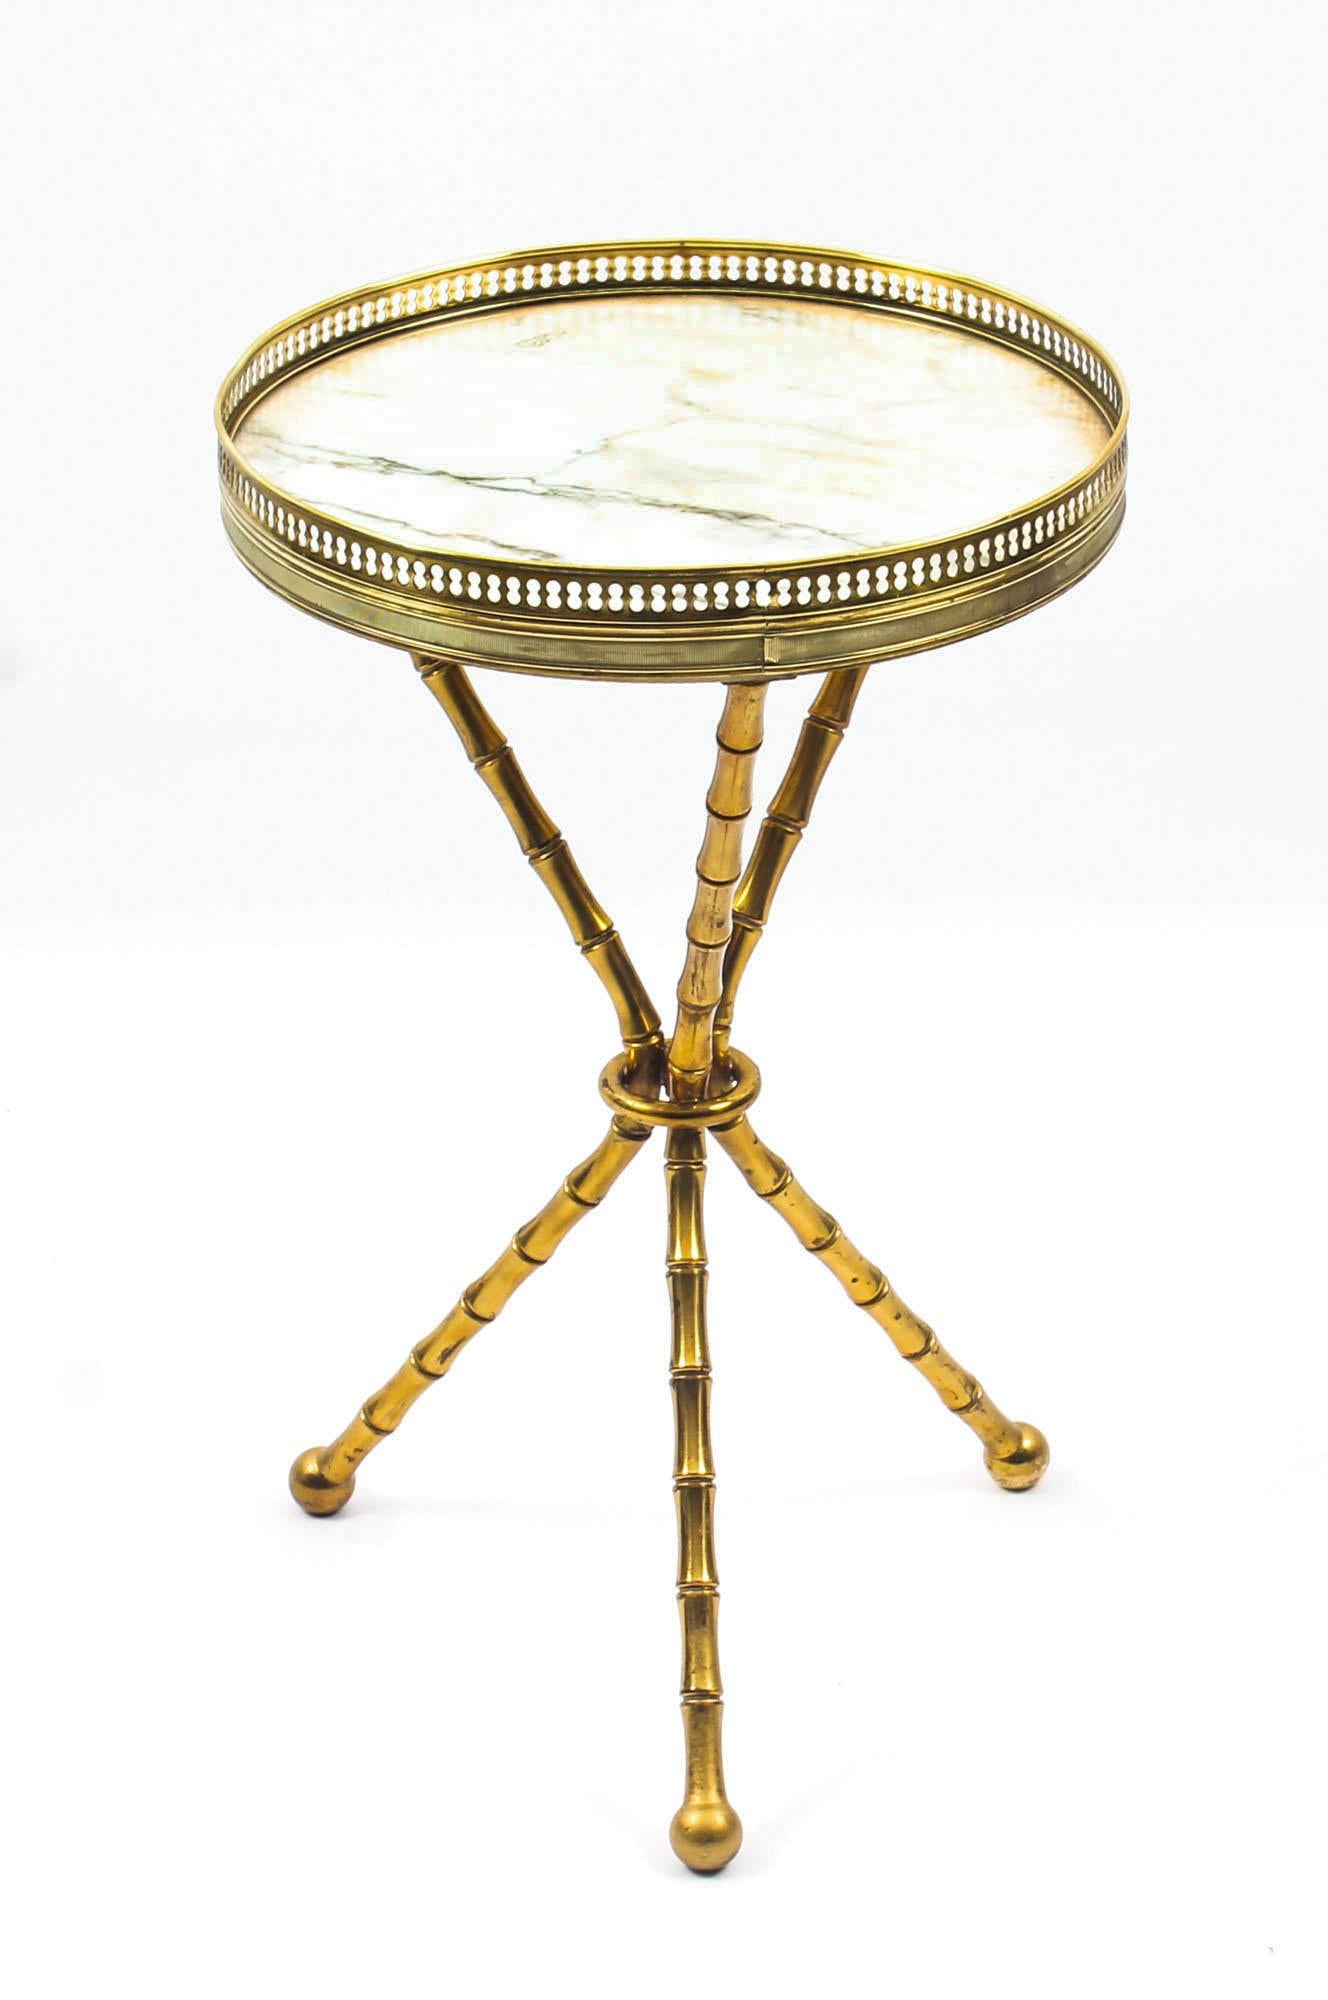 Antique French Ormolu Occasional Table Carrara Marble Top, 19th Century 3